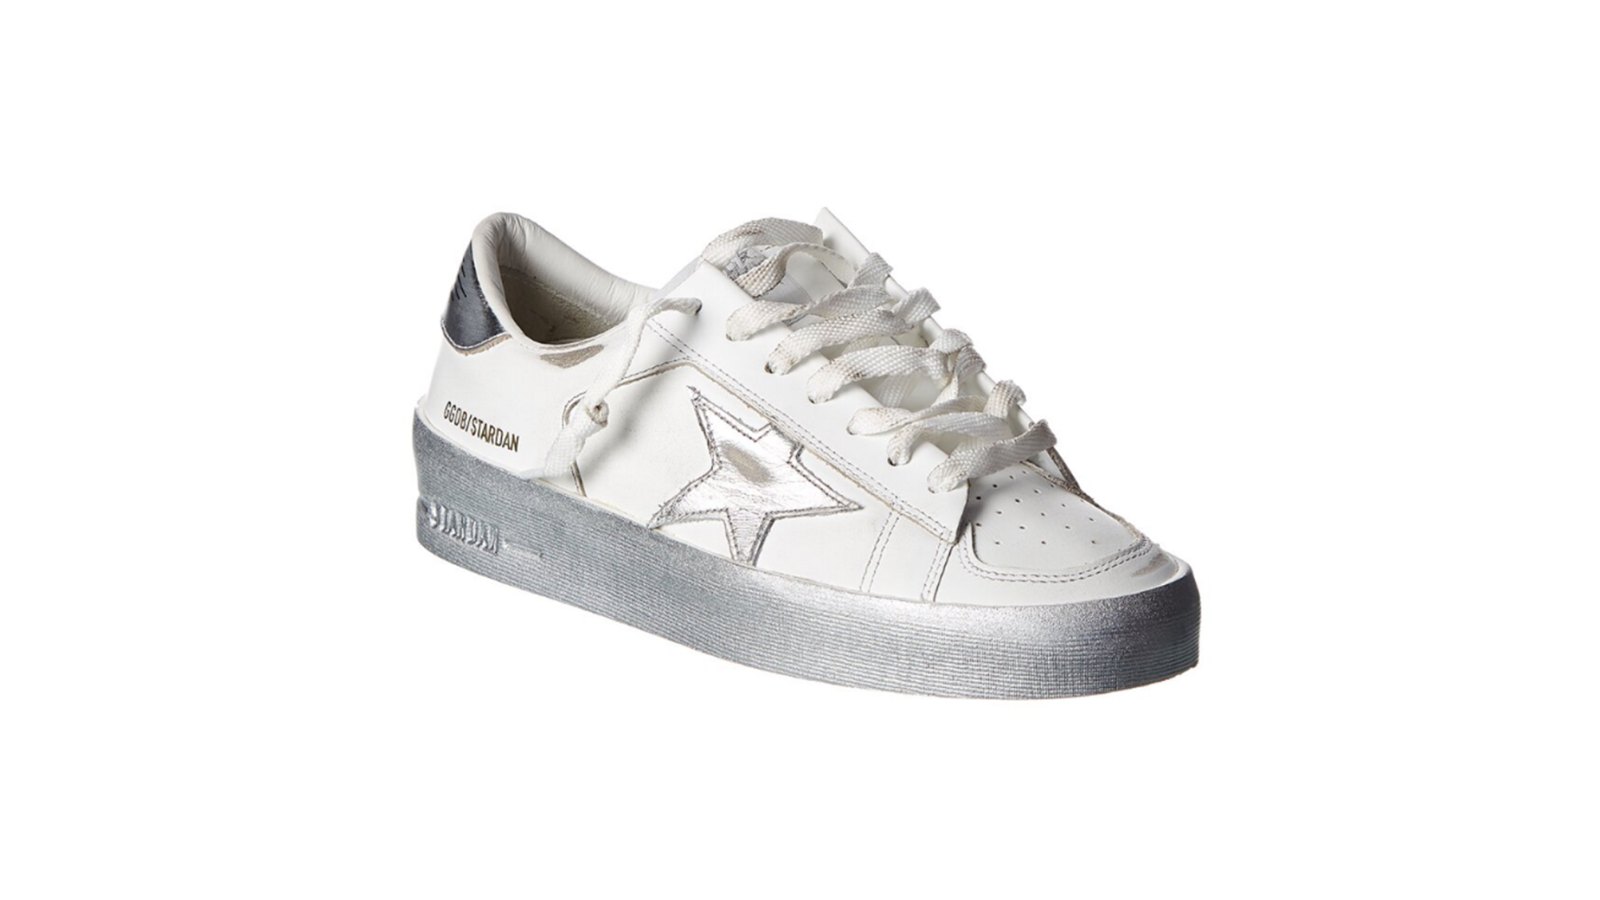 Miniature Hysterisk melodi Golden Goose Sneakers Are on Major Sale at GILT — Ends Tonight